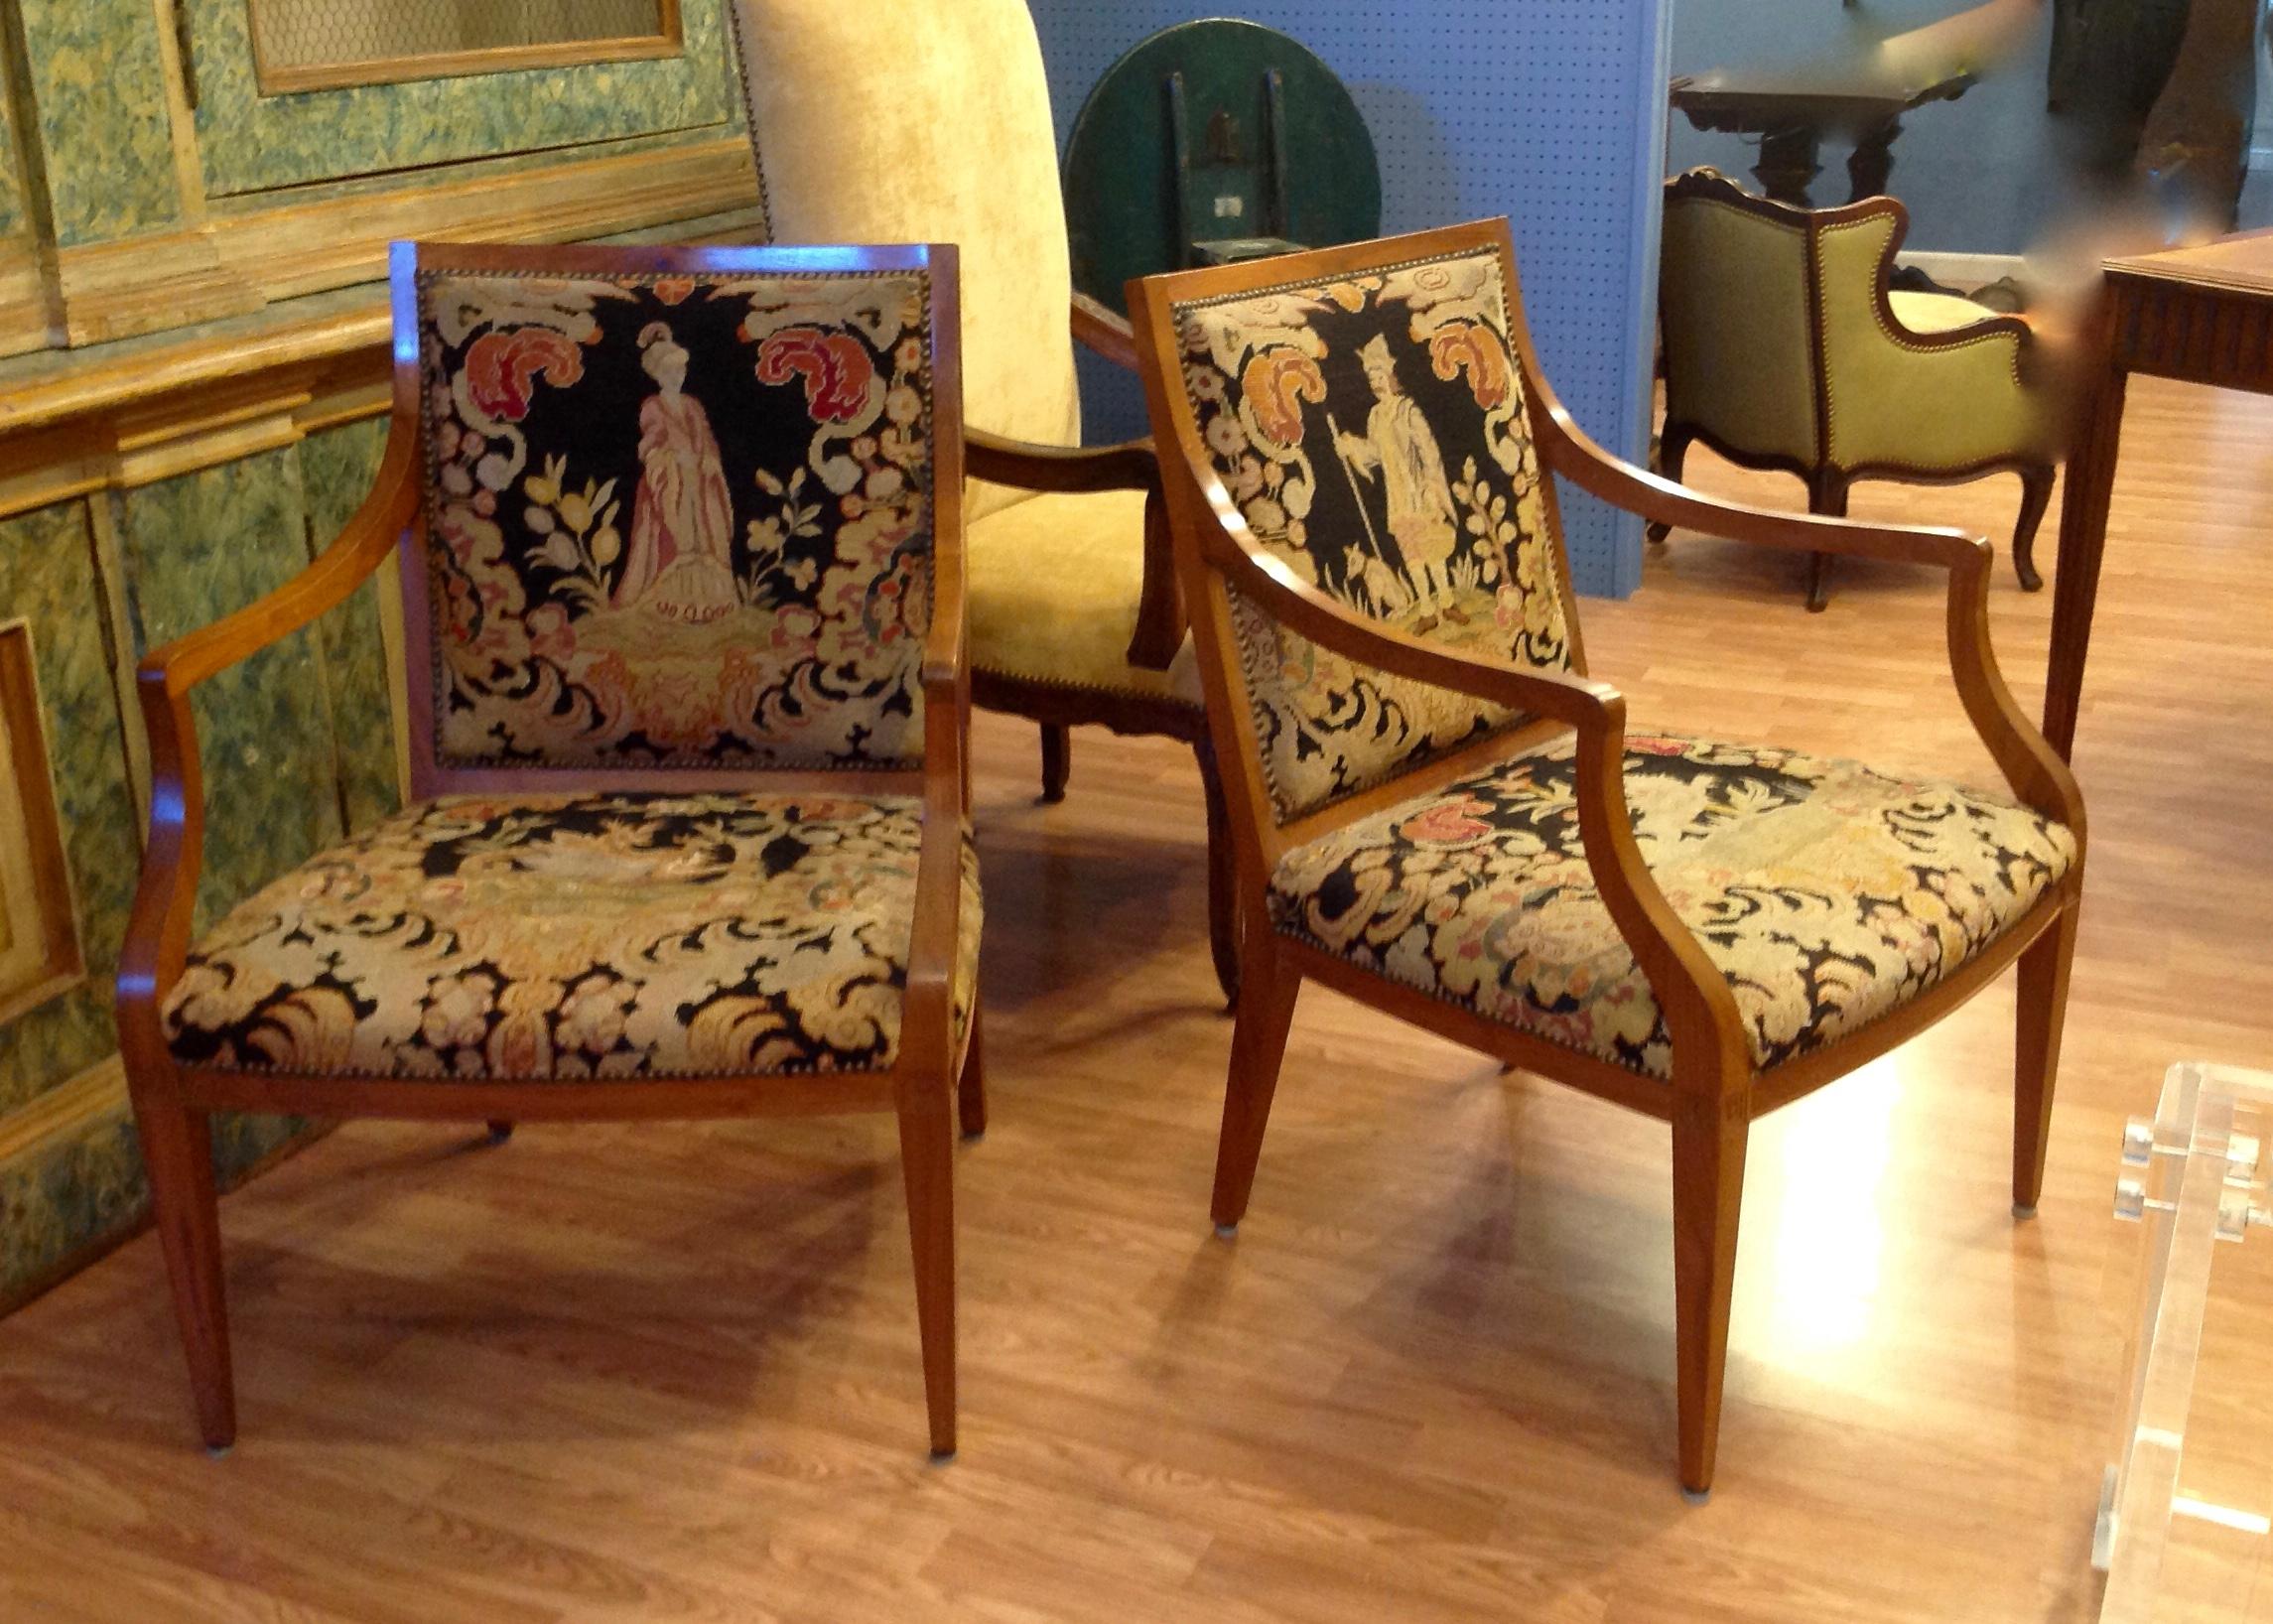 Fine fruitwood frames and dramatic original needlepoint seats and backrests.
The seats are appointed with dragons and the backs have opposing male and female figures.